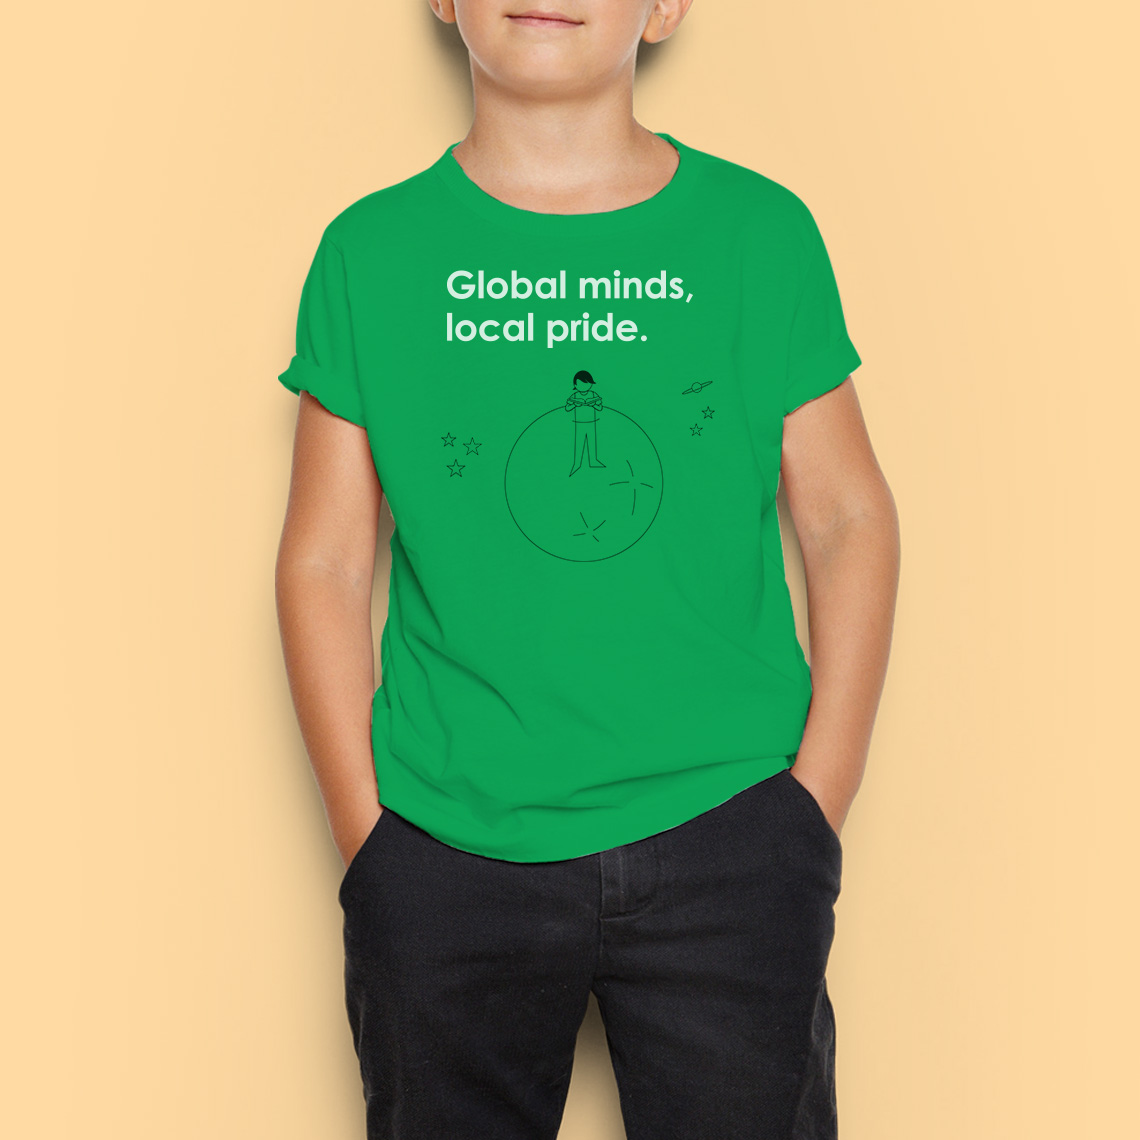 Citizens of the World Childrens' T-Shirt designed by Kilter